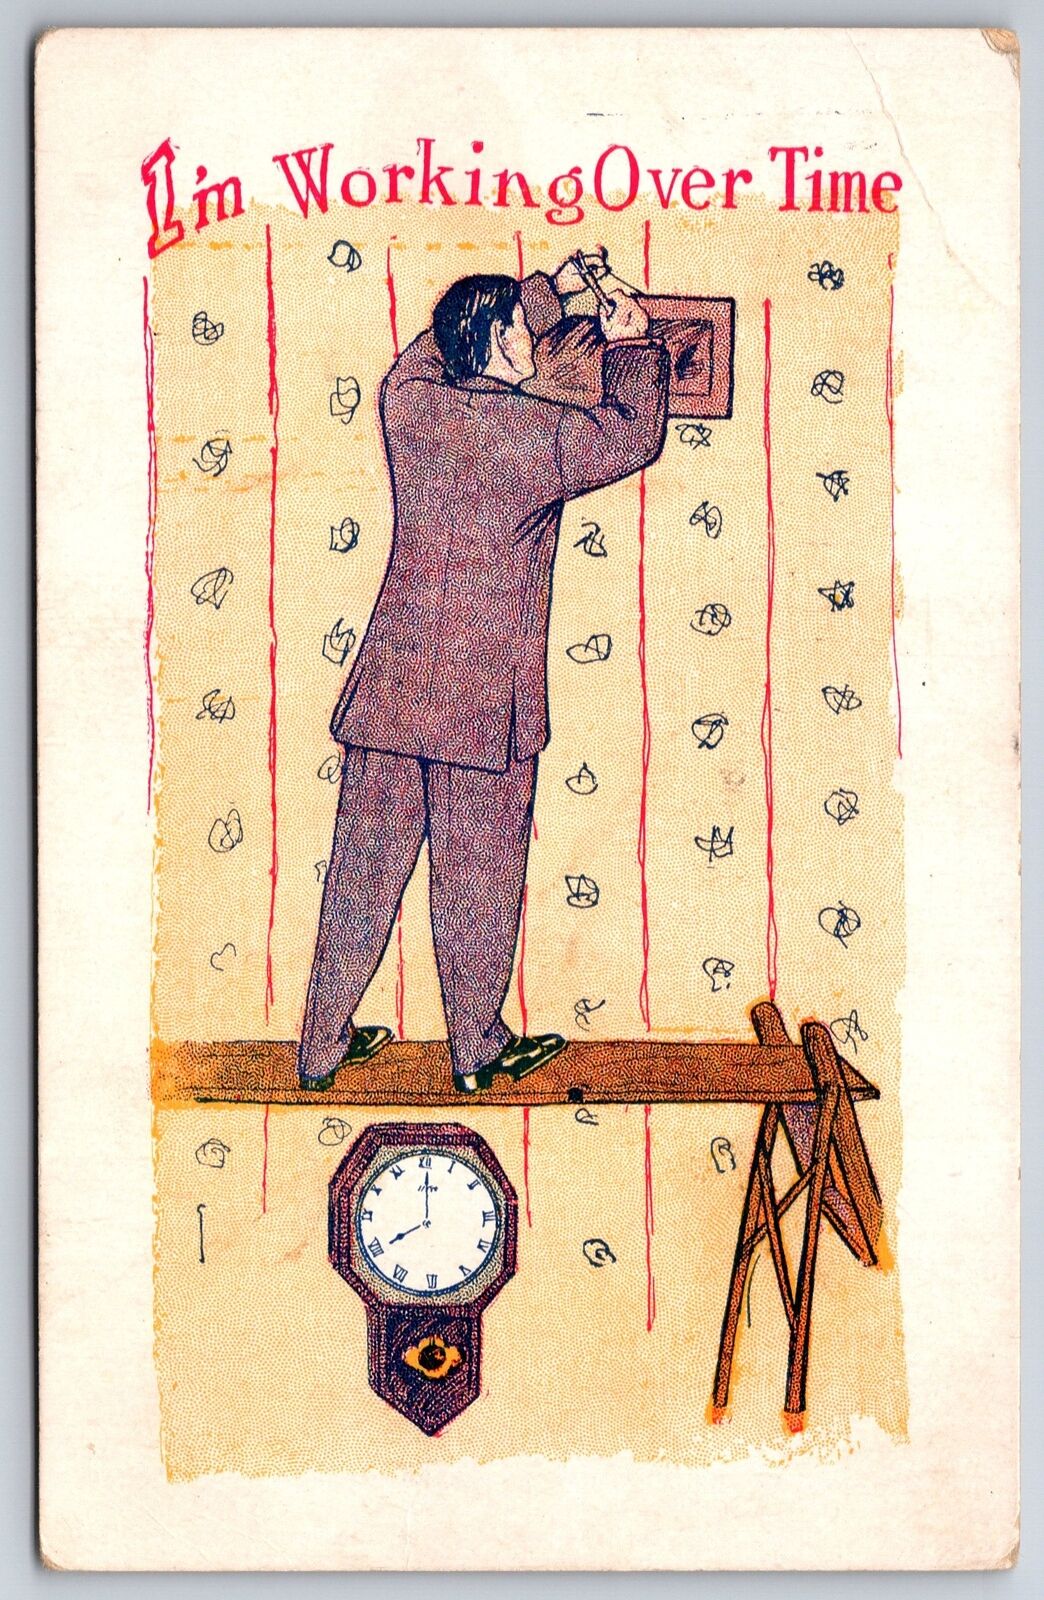 Comic Pun~”I\'m Working Over Time”~Man Hanging Frame Above Wall Clock~1908